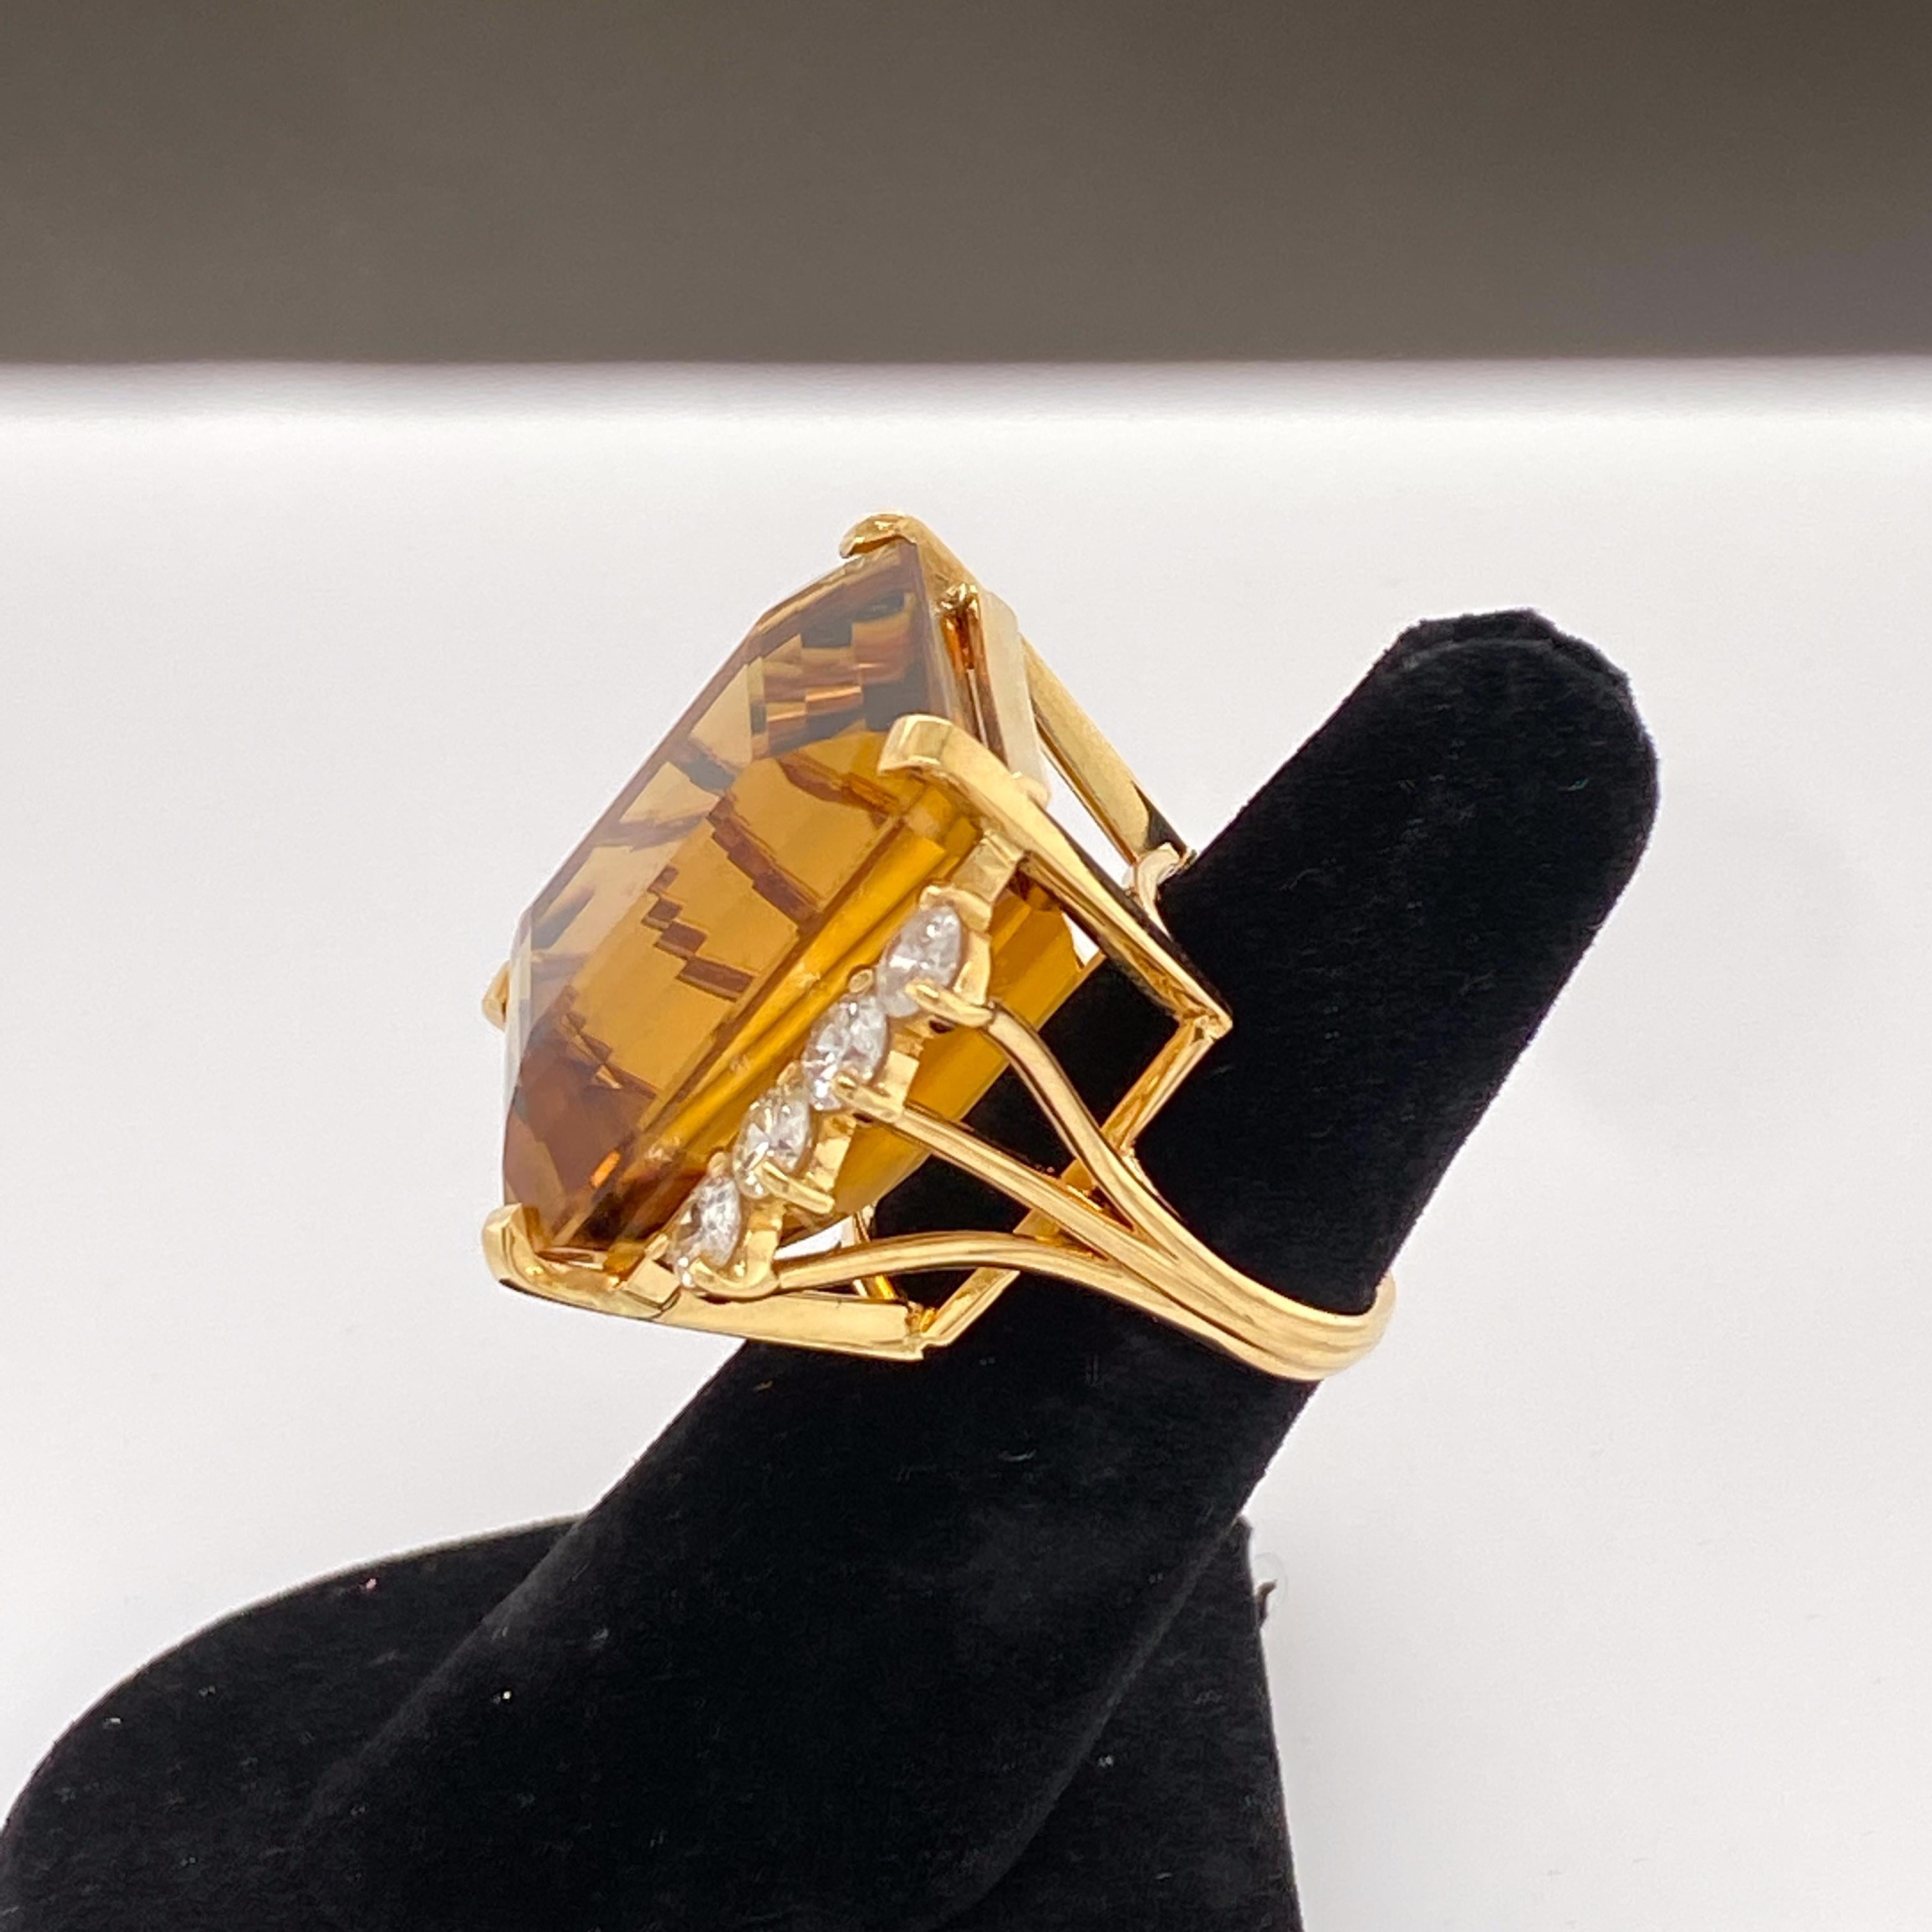 Gorgeous citrine cocktail ring set in 18kt yellow gold with almost 2.5cts for F/G color diamonds on each side accenting the exceptional colored center stone.
SIZE 6.5